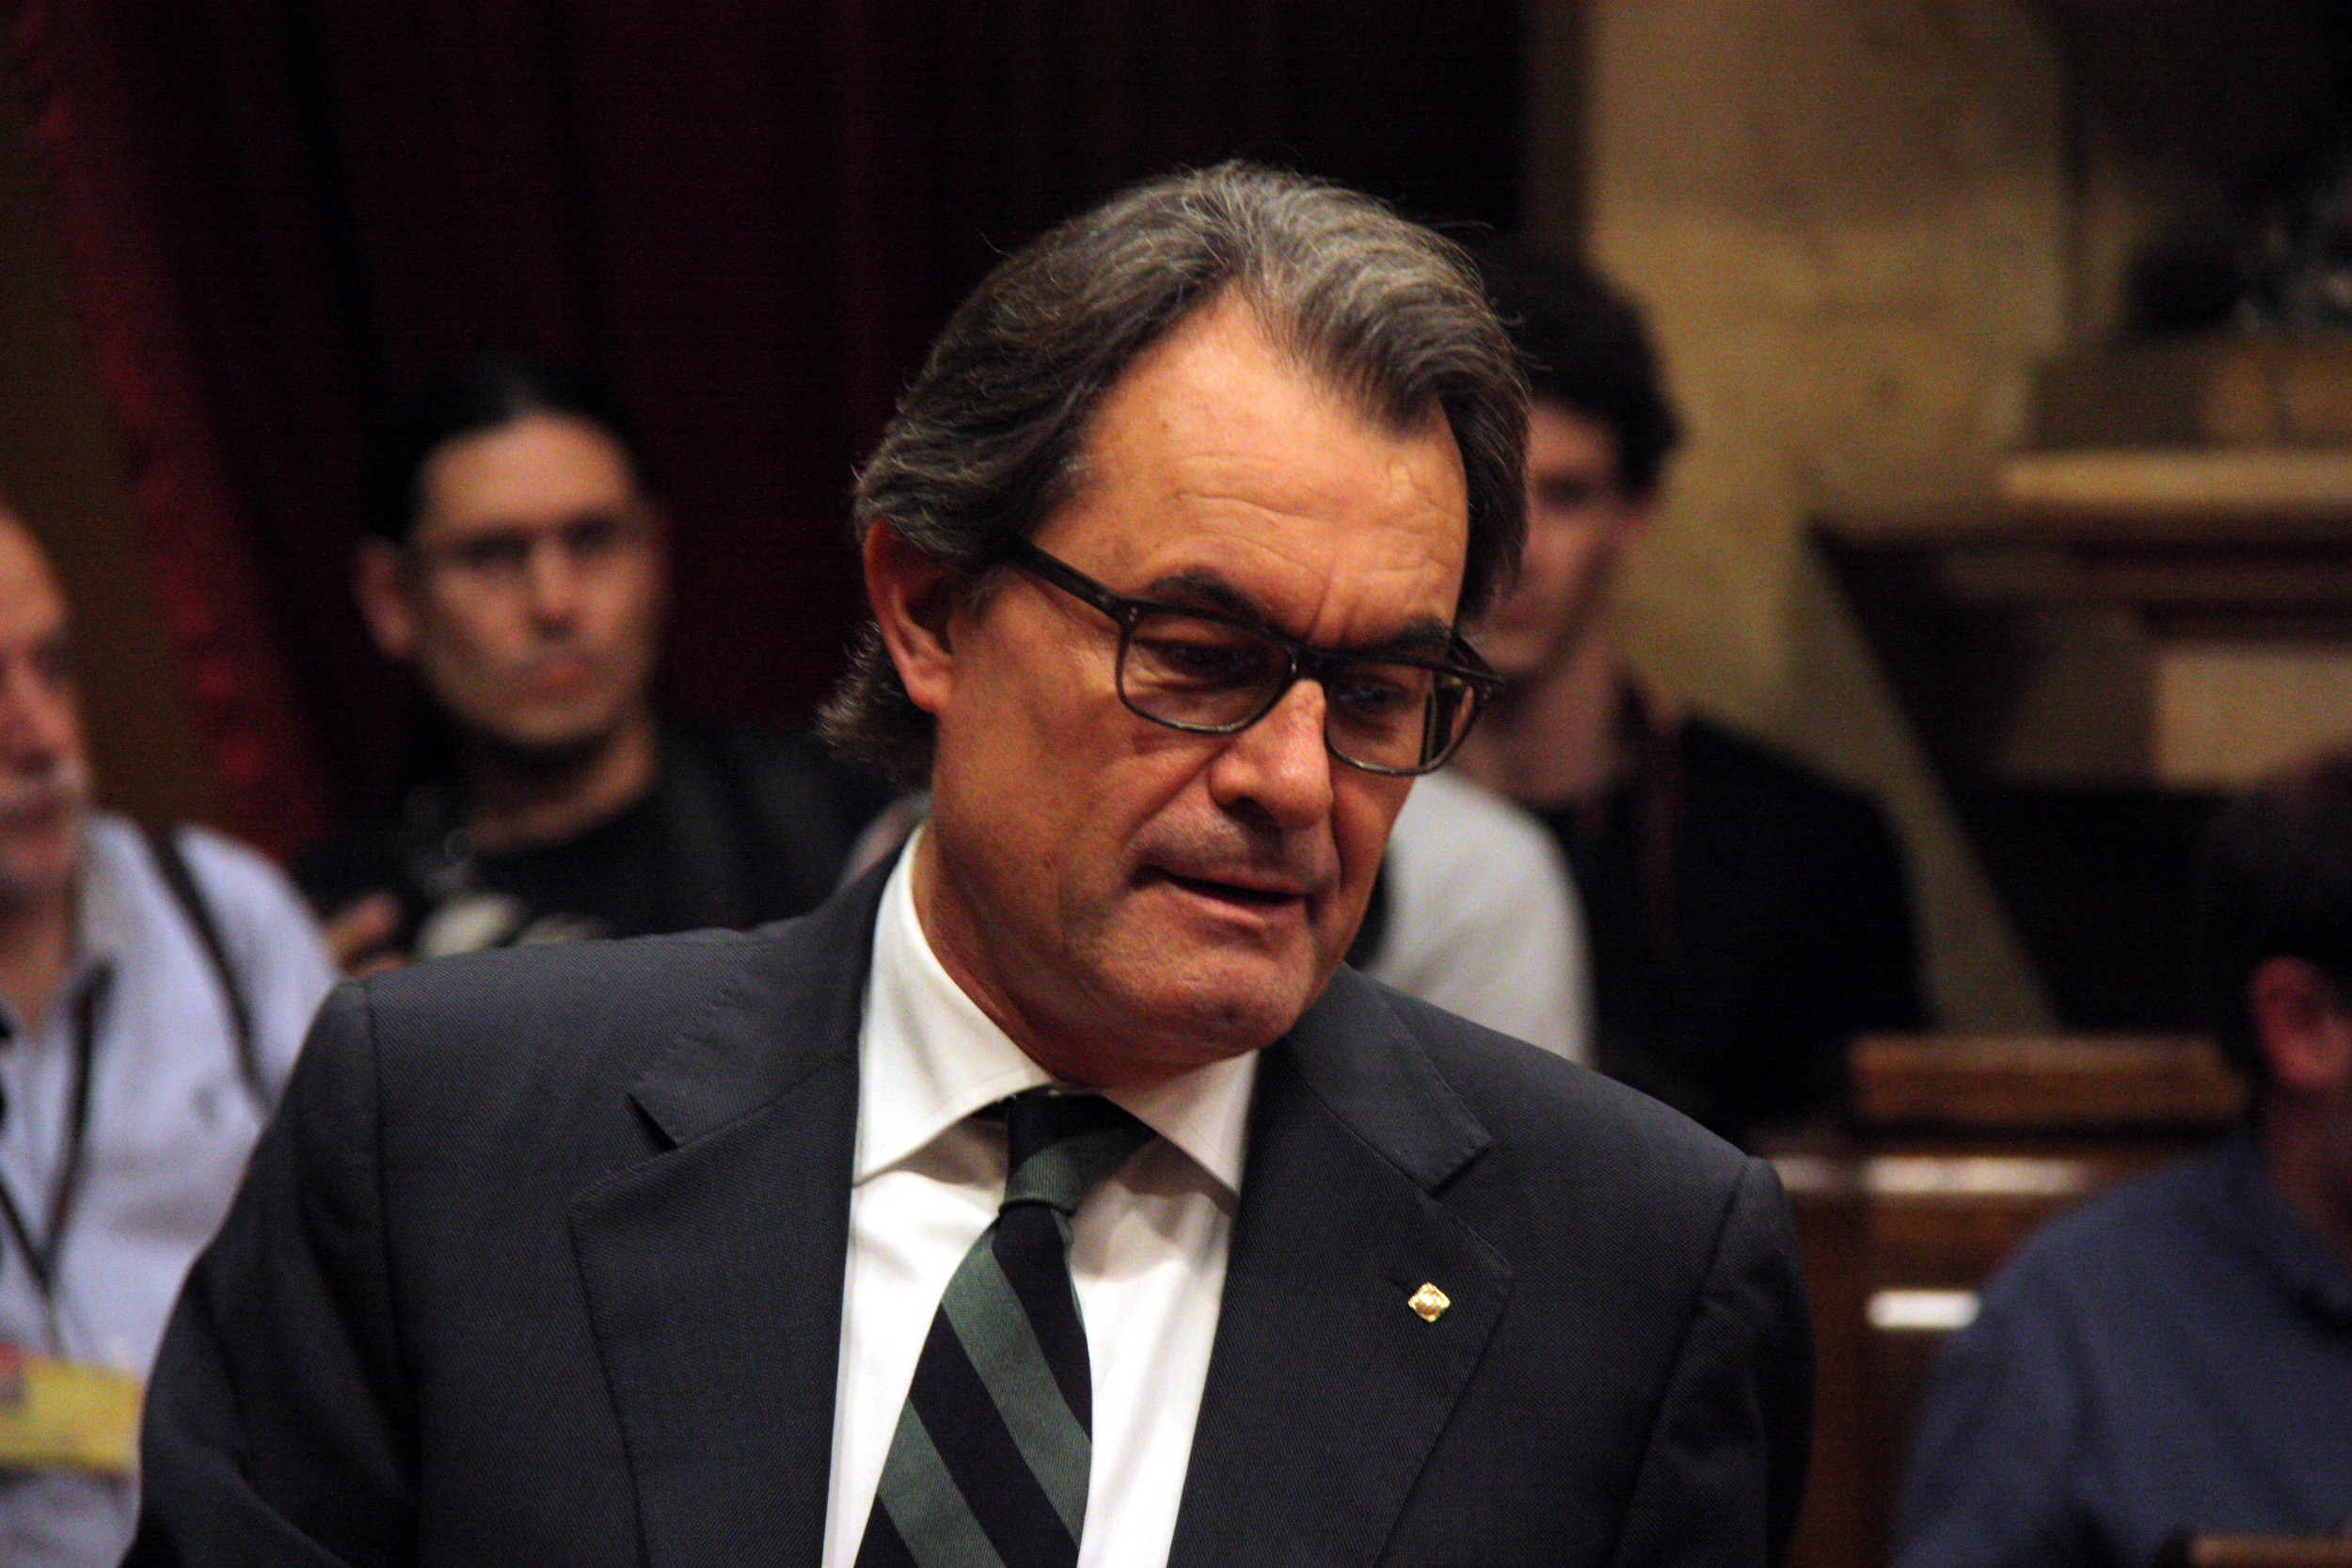 Artur Mas did not win the first vote to be the next president (by ACN)